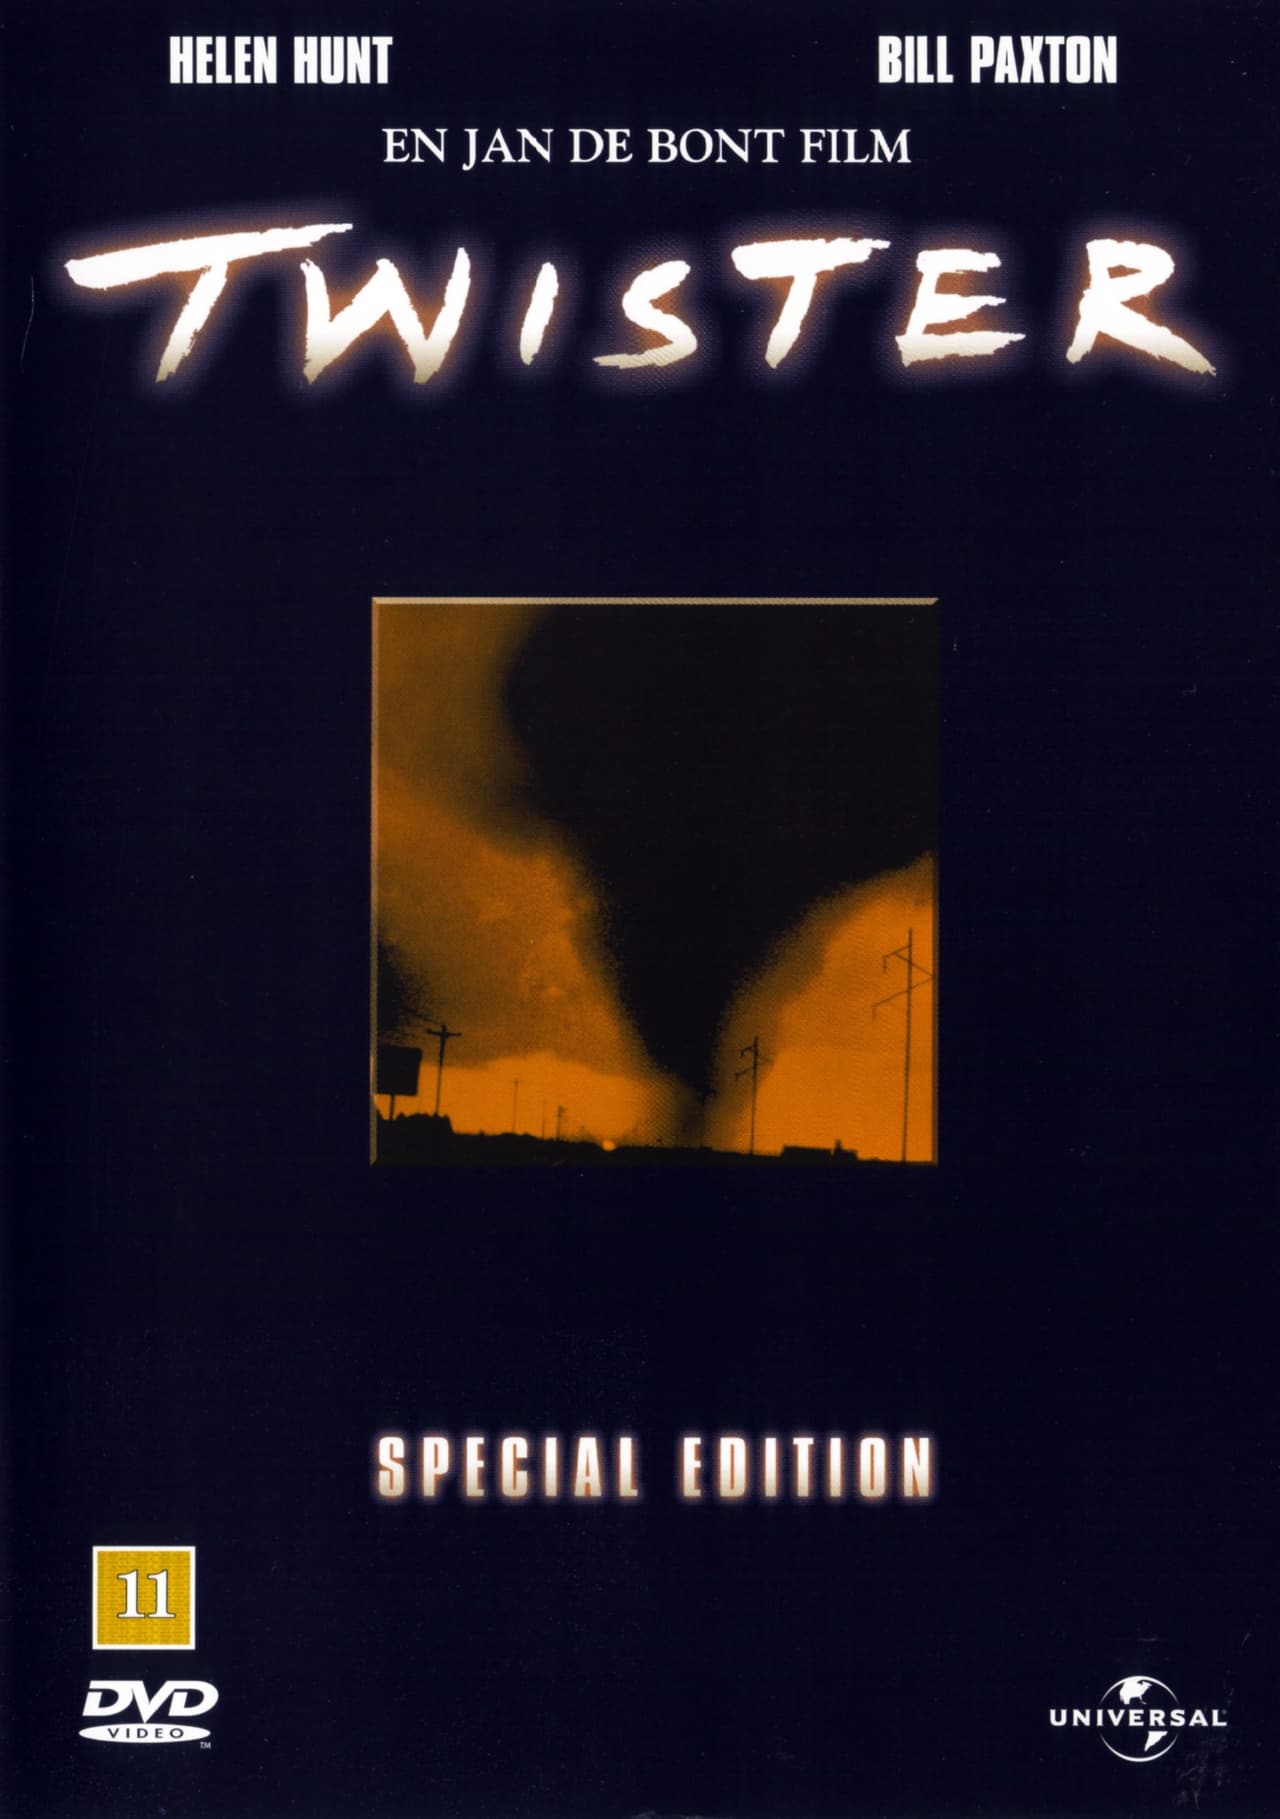 Twister (1996) wiki, synopsis, reviews, watch and download
